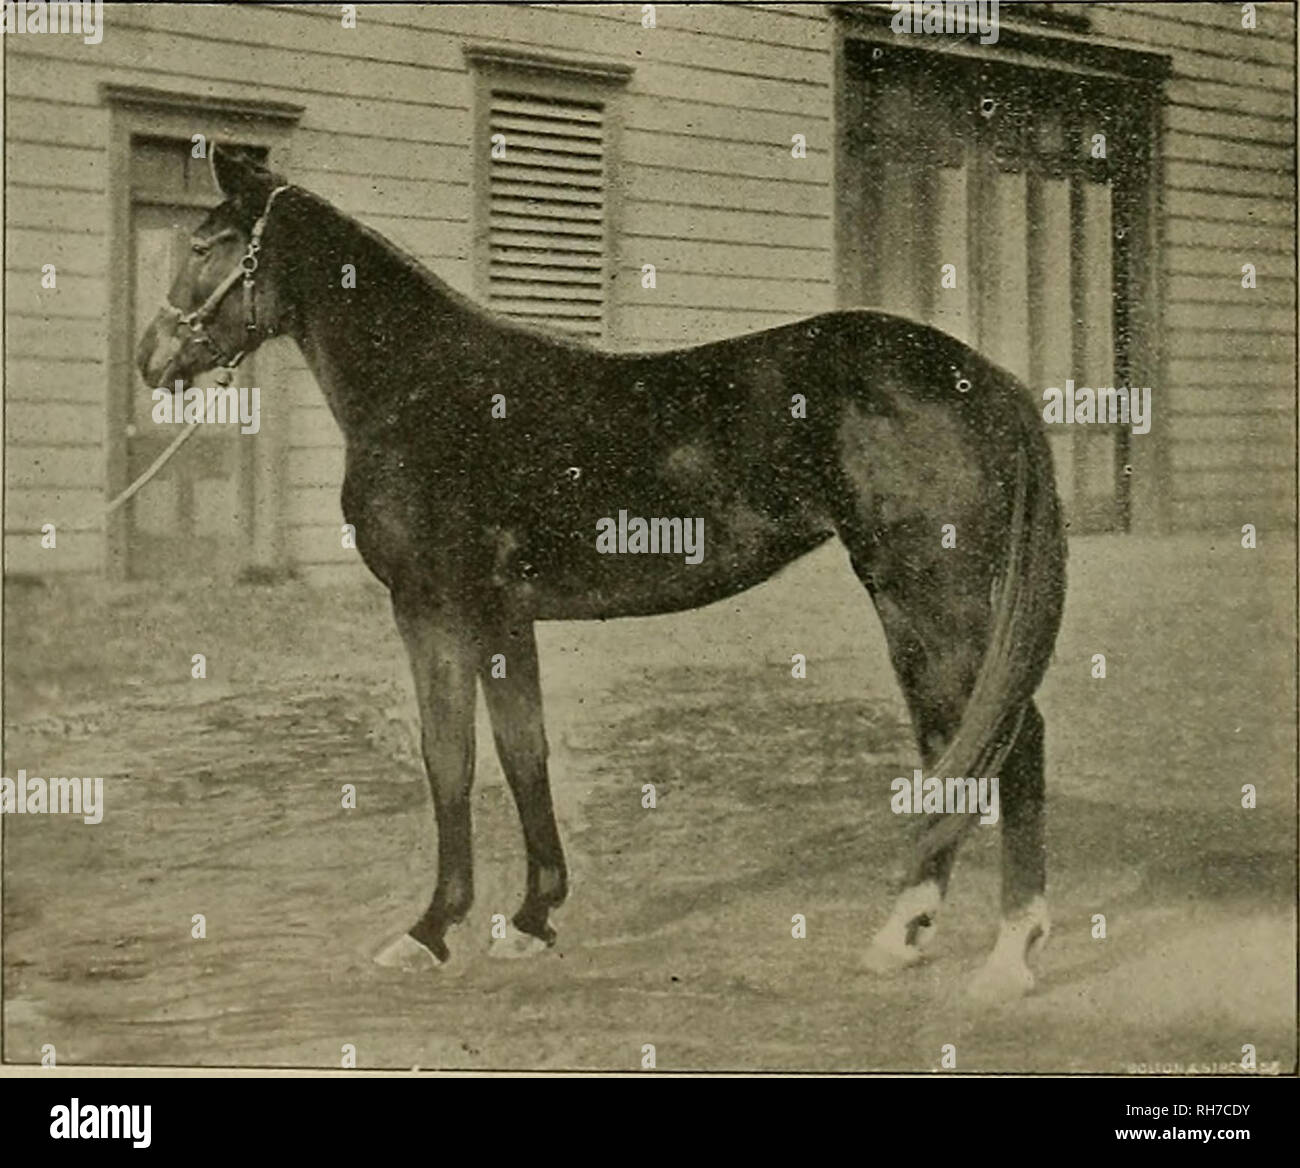 Yearling photos The nude Boomer's Beefcake